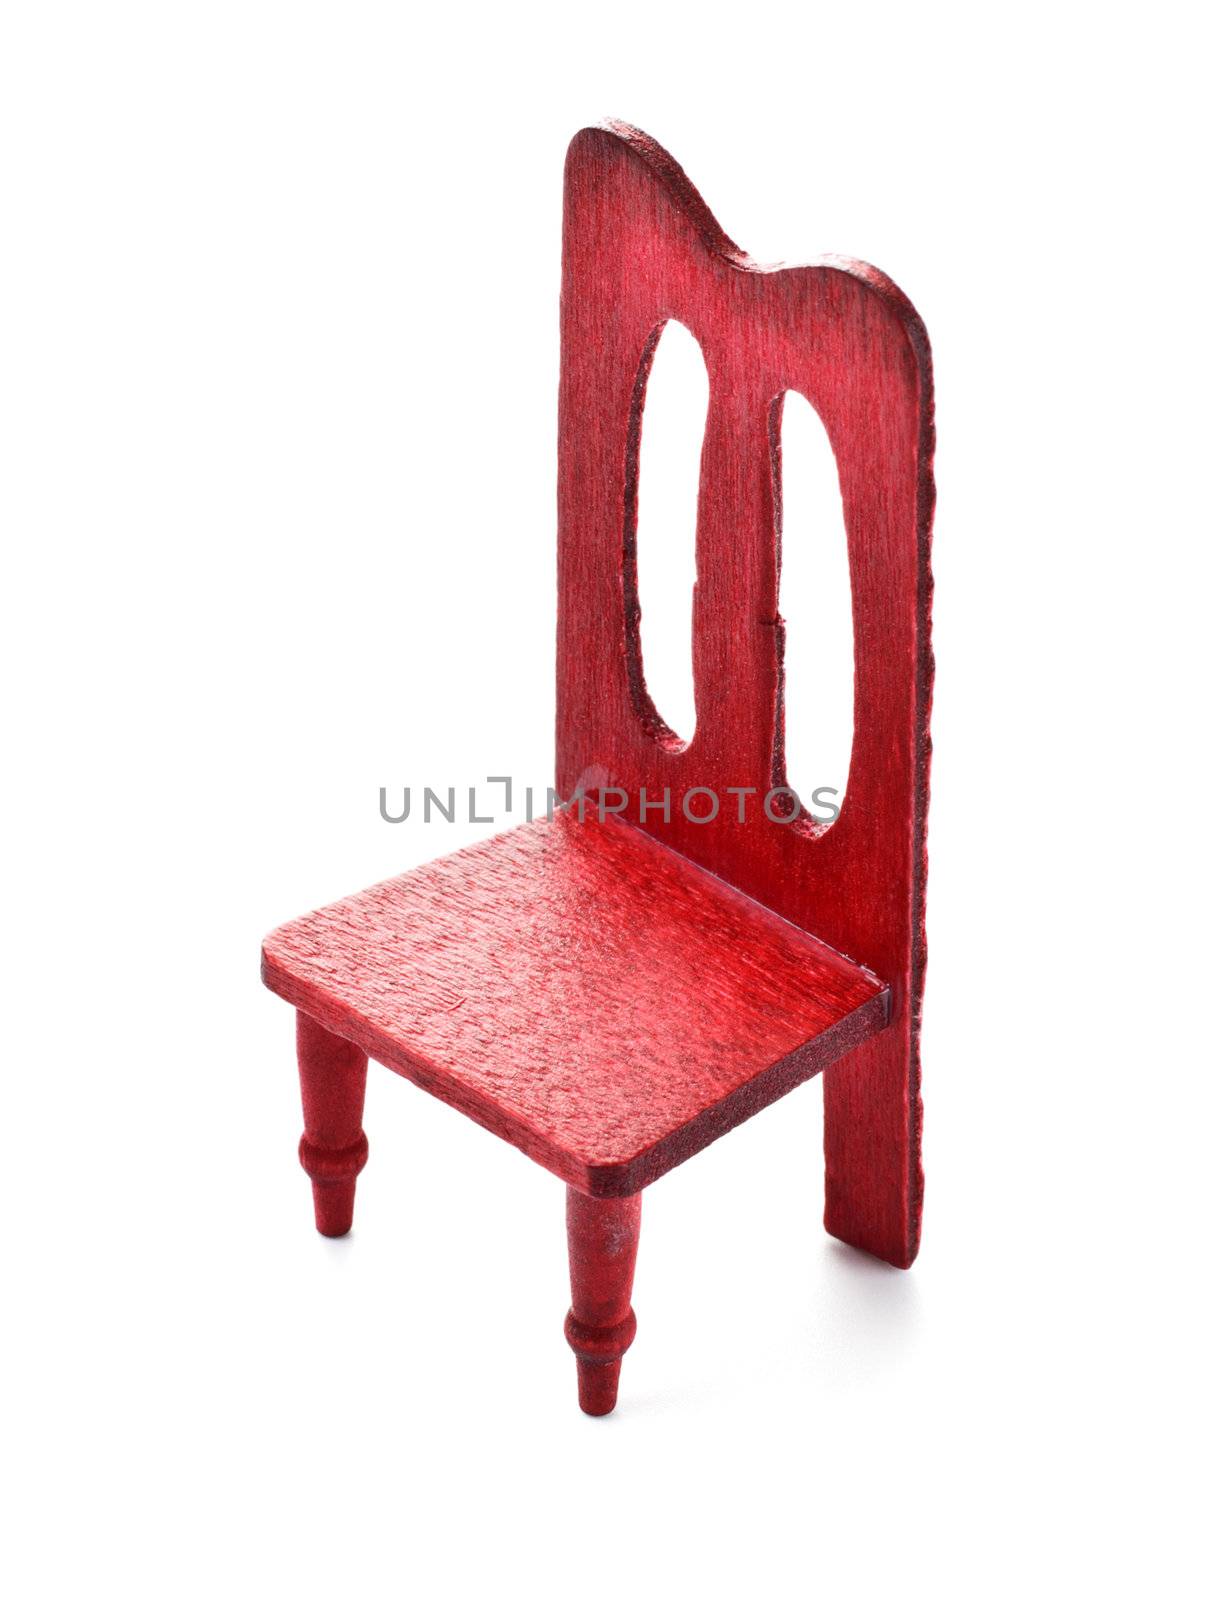 toy furniture, chair by petr_malyshev